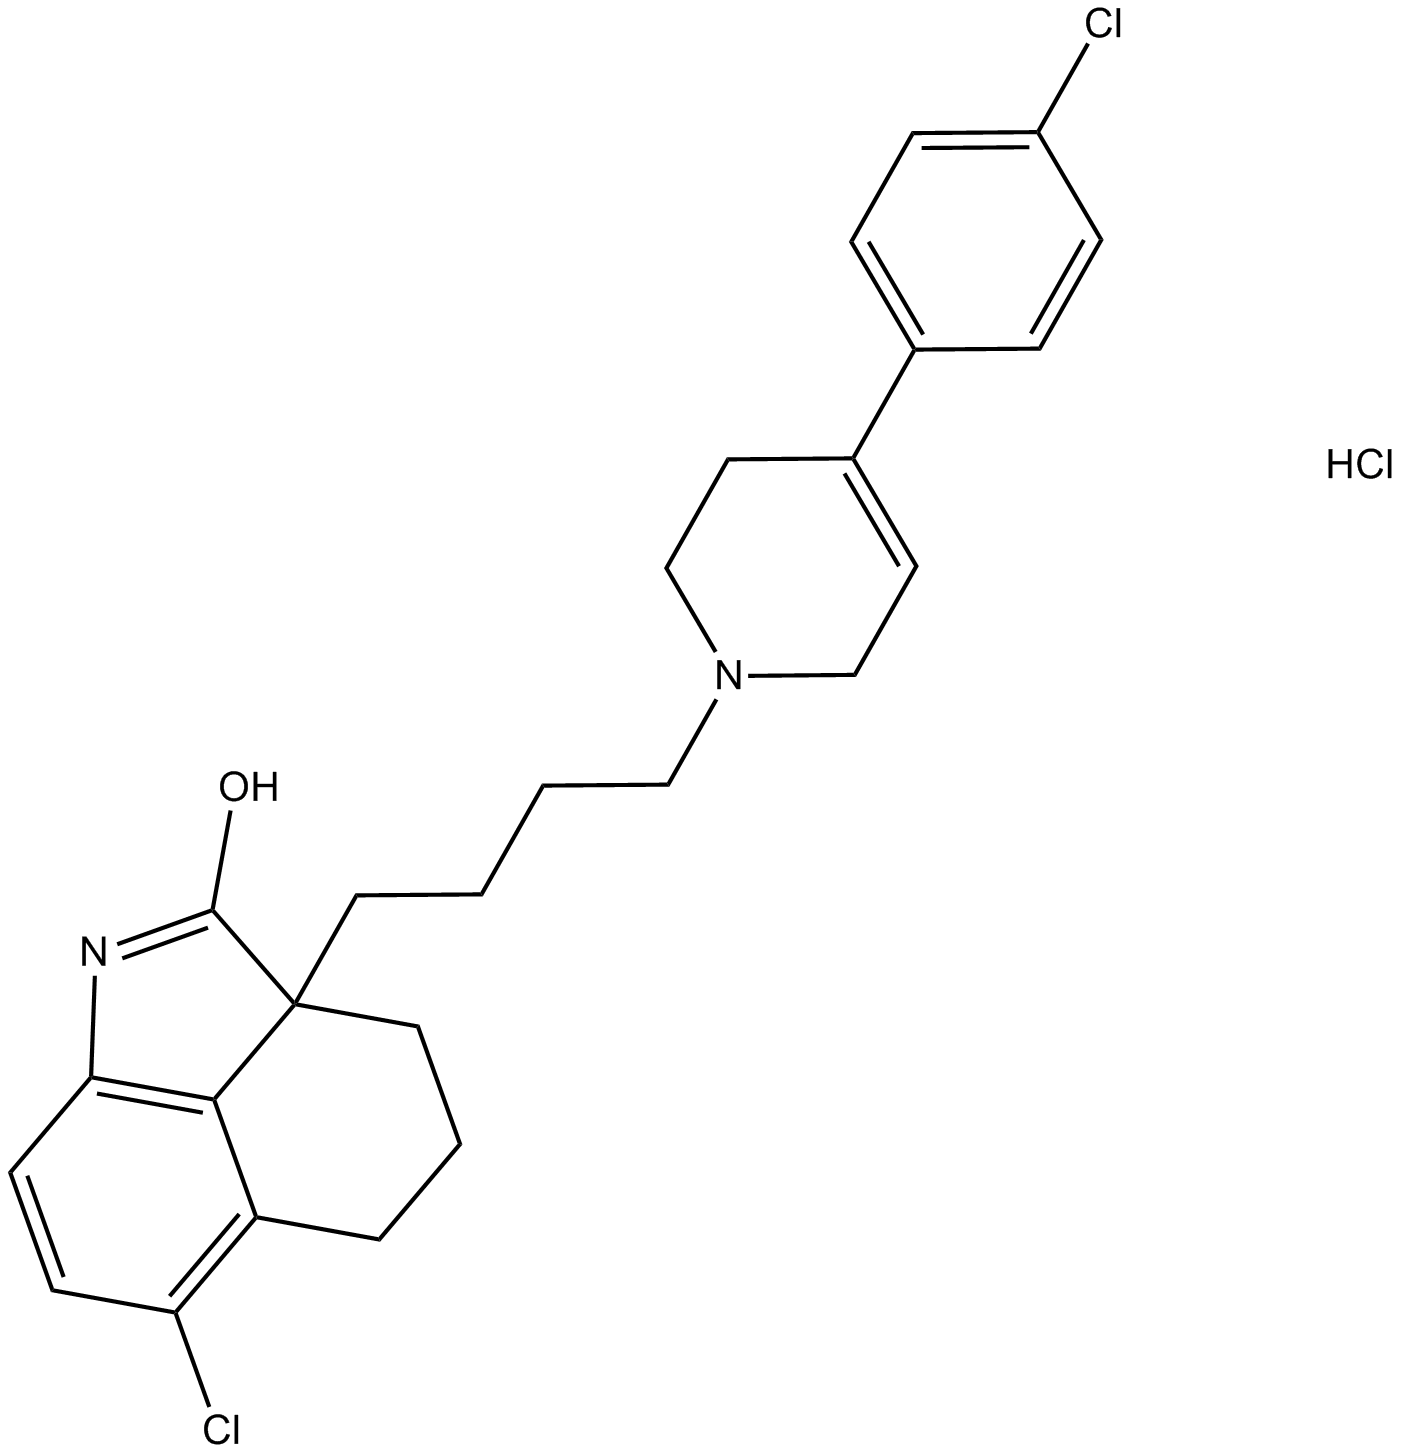 DR 4485 hydrochloride  Chemical Structure